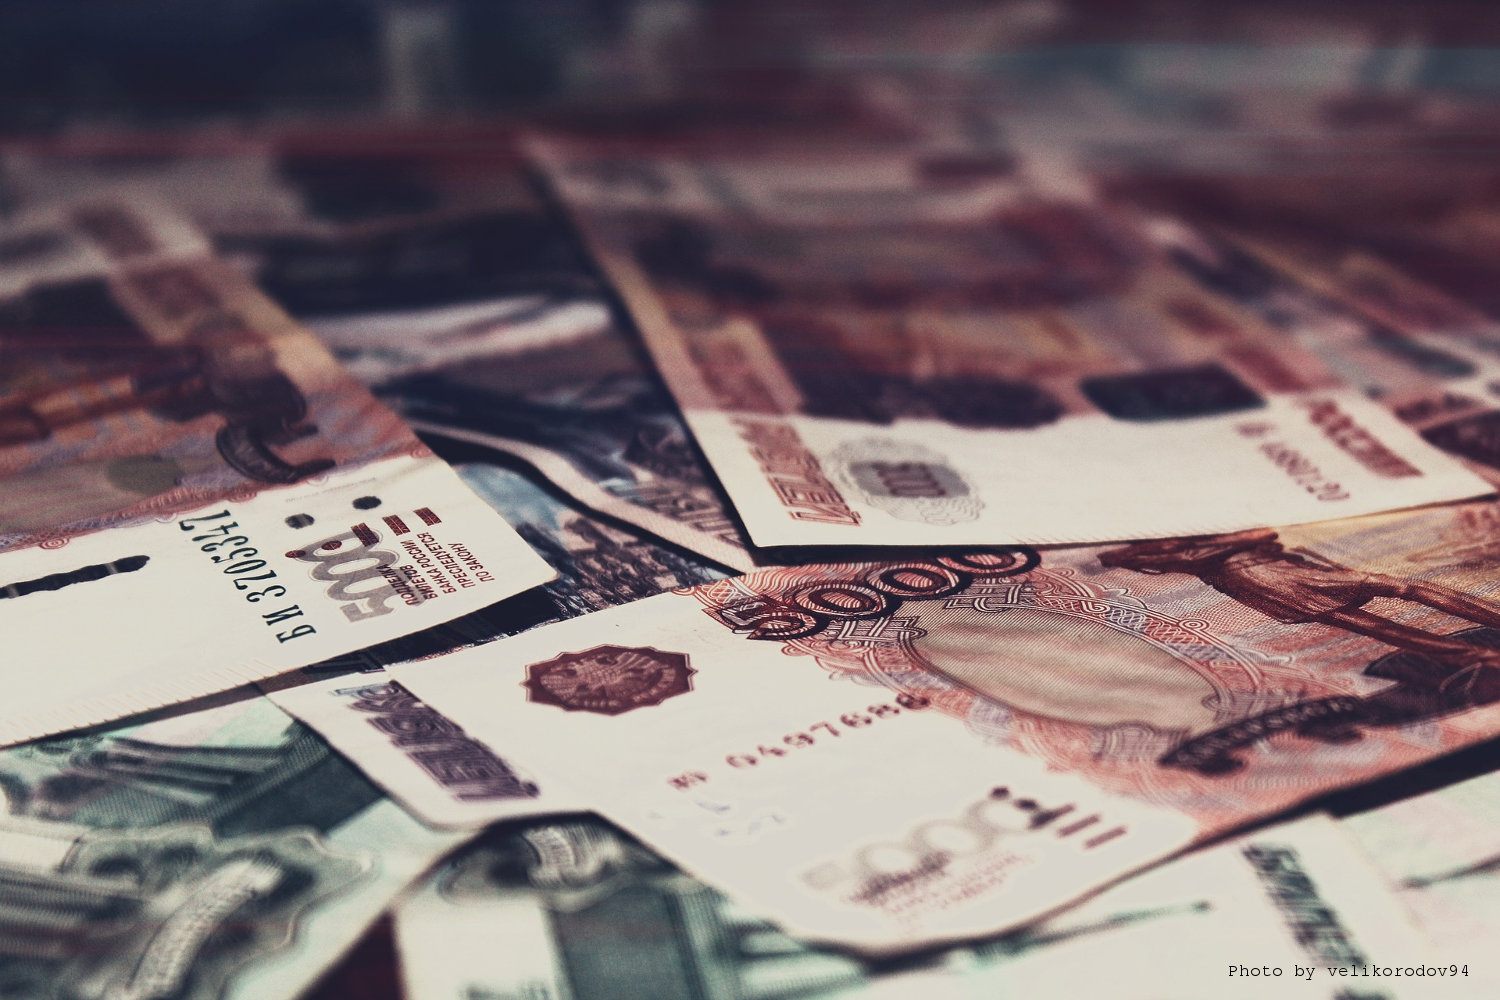 Russian currency is introduced in the occupied parts of Donbas - OSCE 1